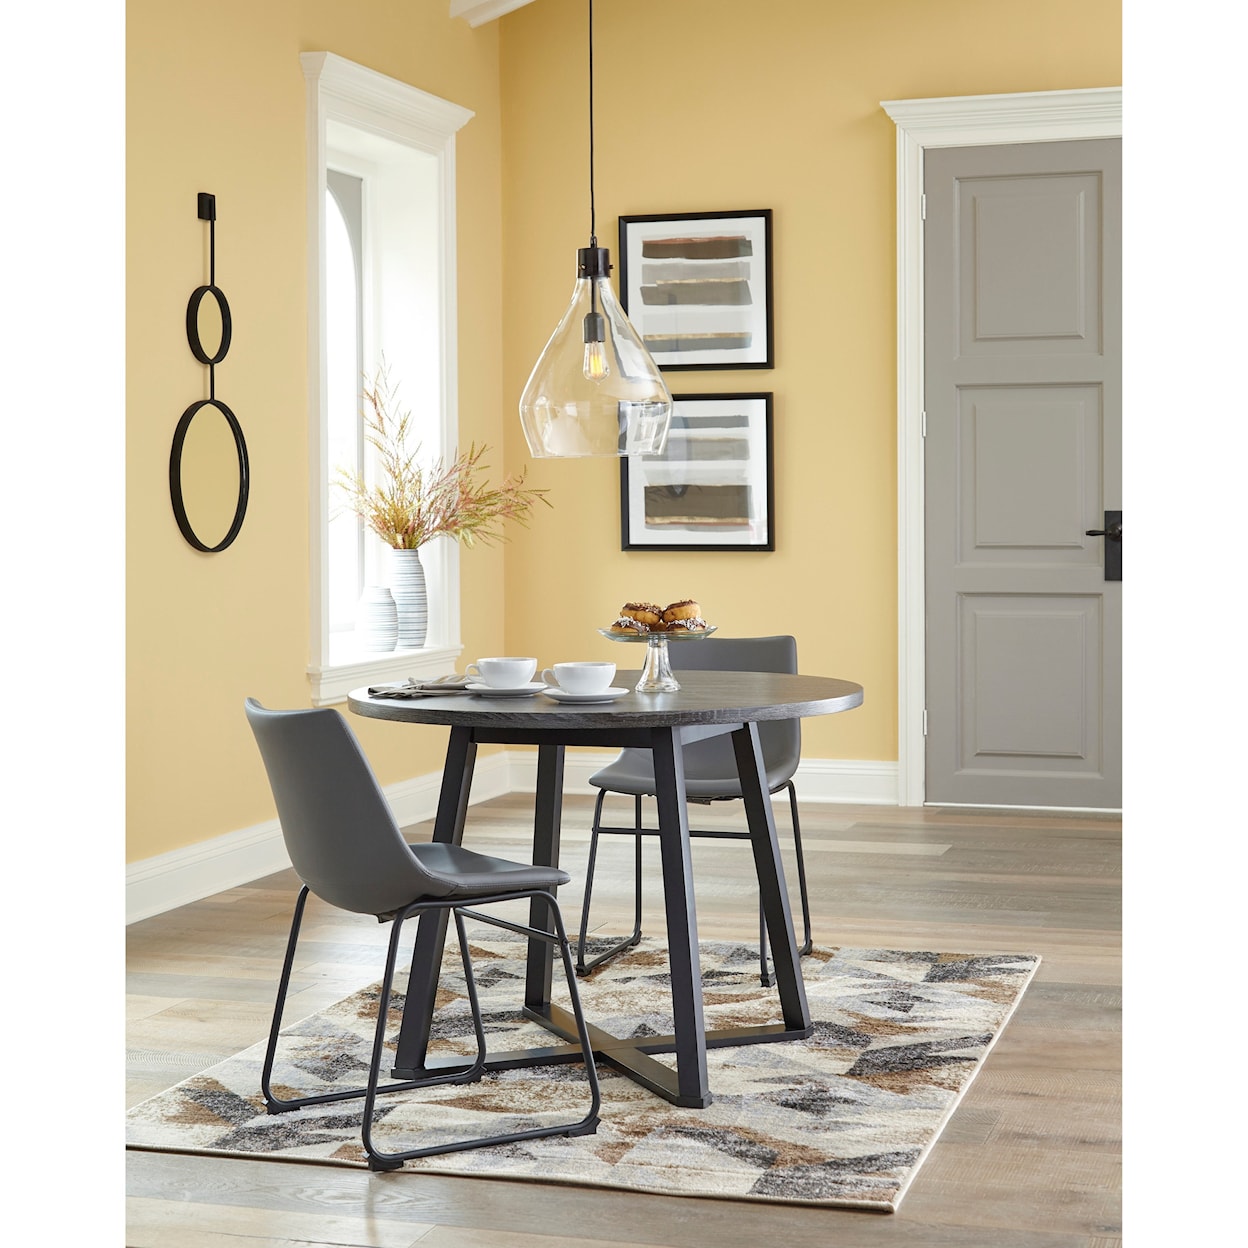 Signature Design by Ashley Furniture Centiar 3-Piece Round Dining Table Set